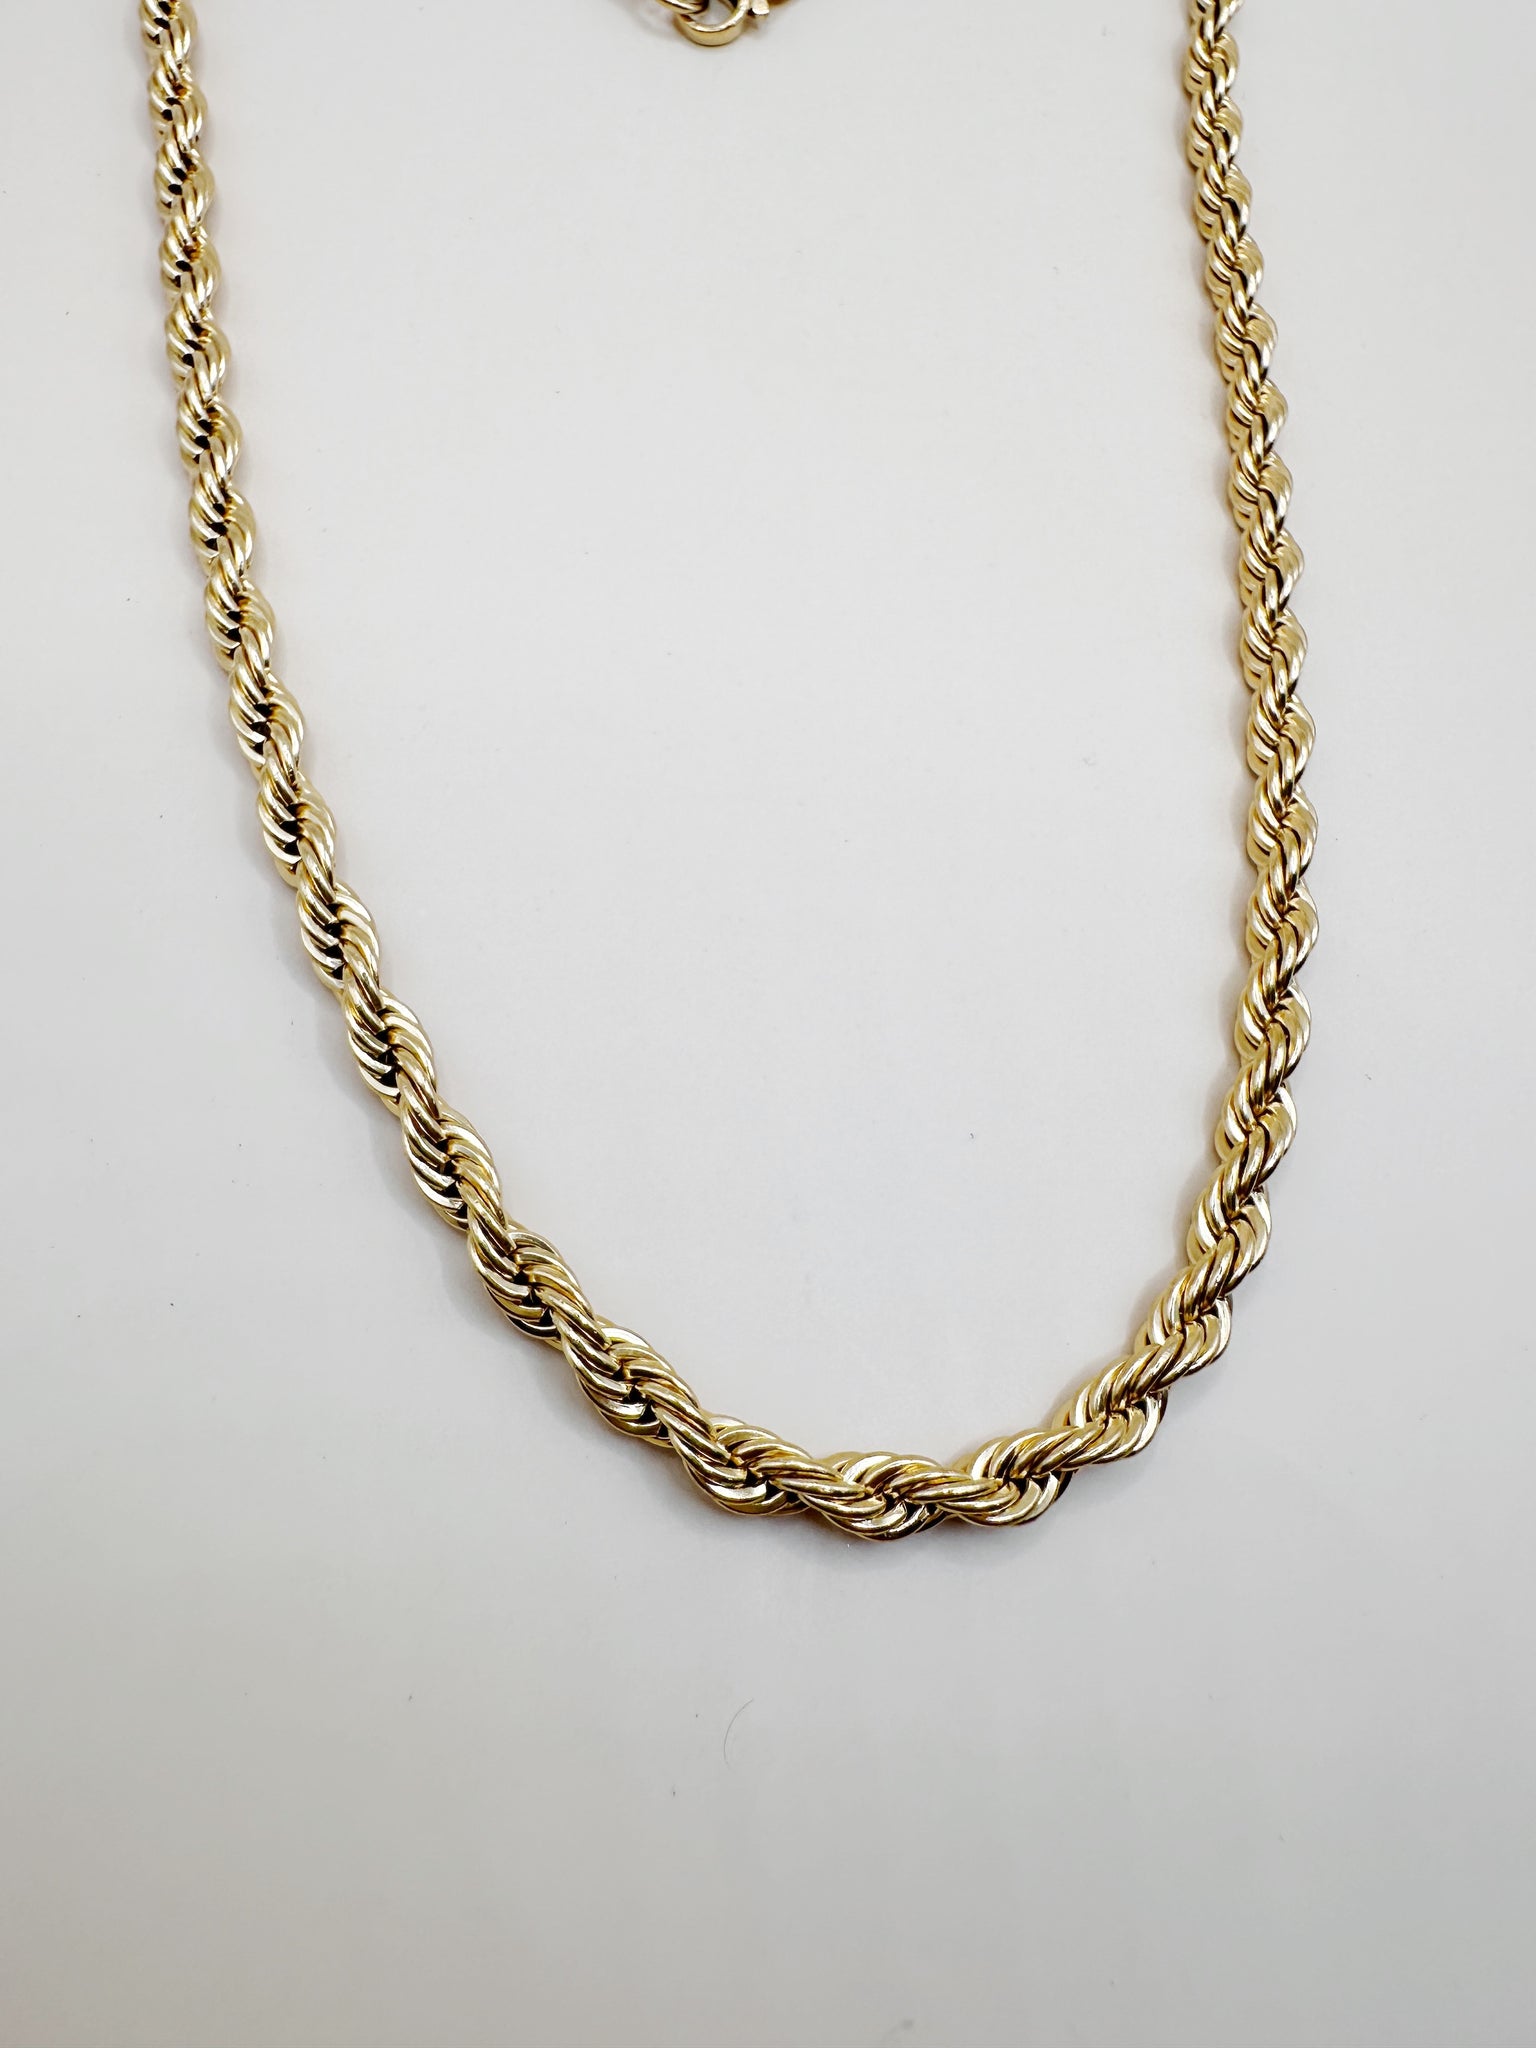 Phoenix Rope Chain Necklace